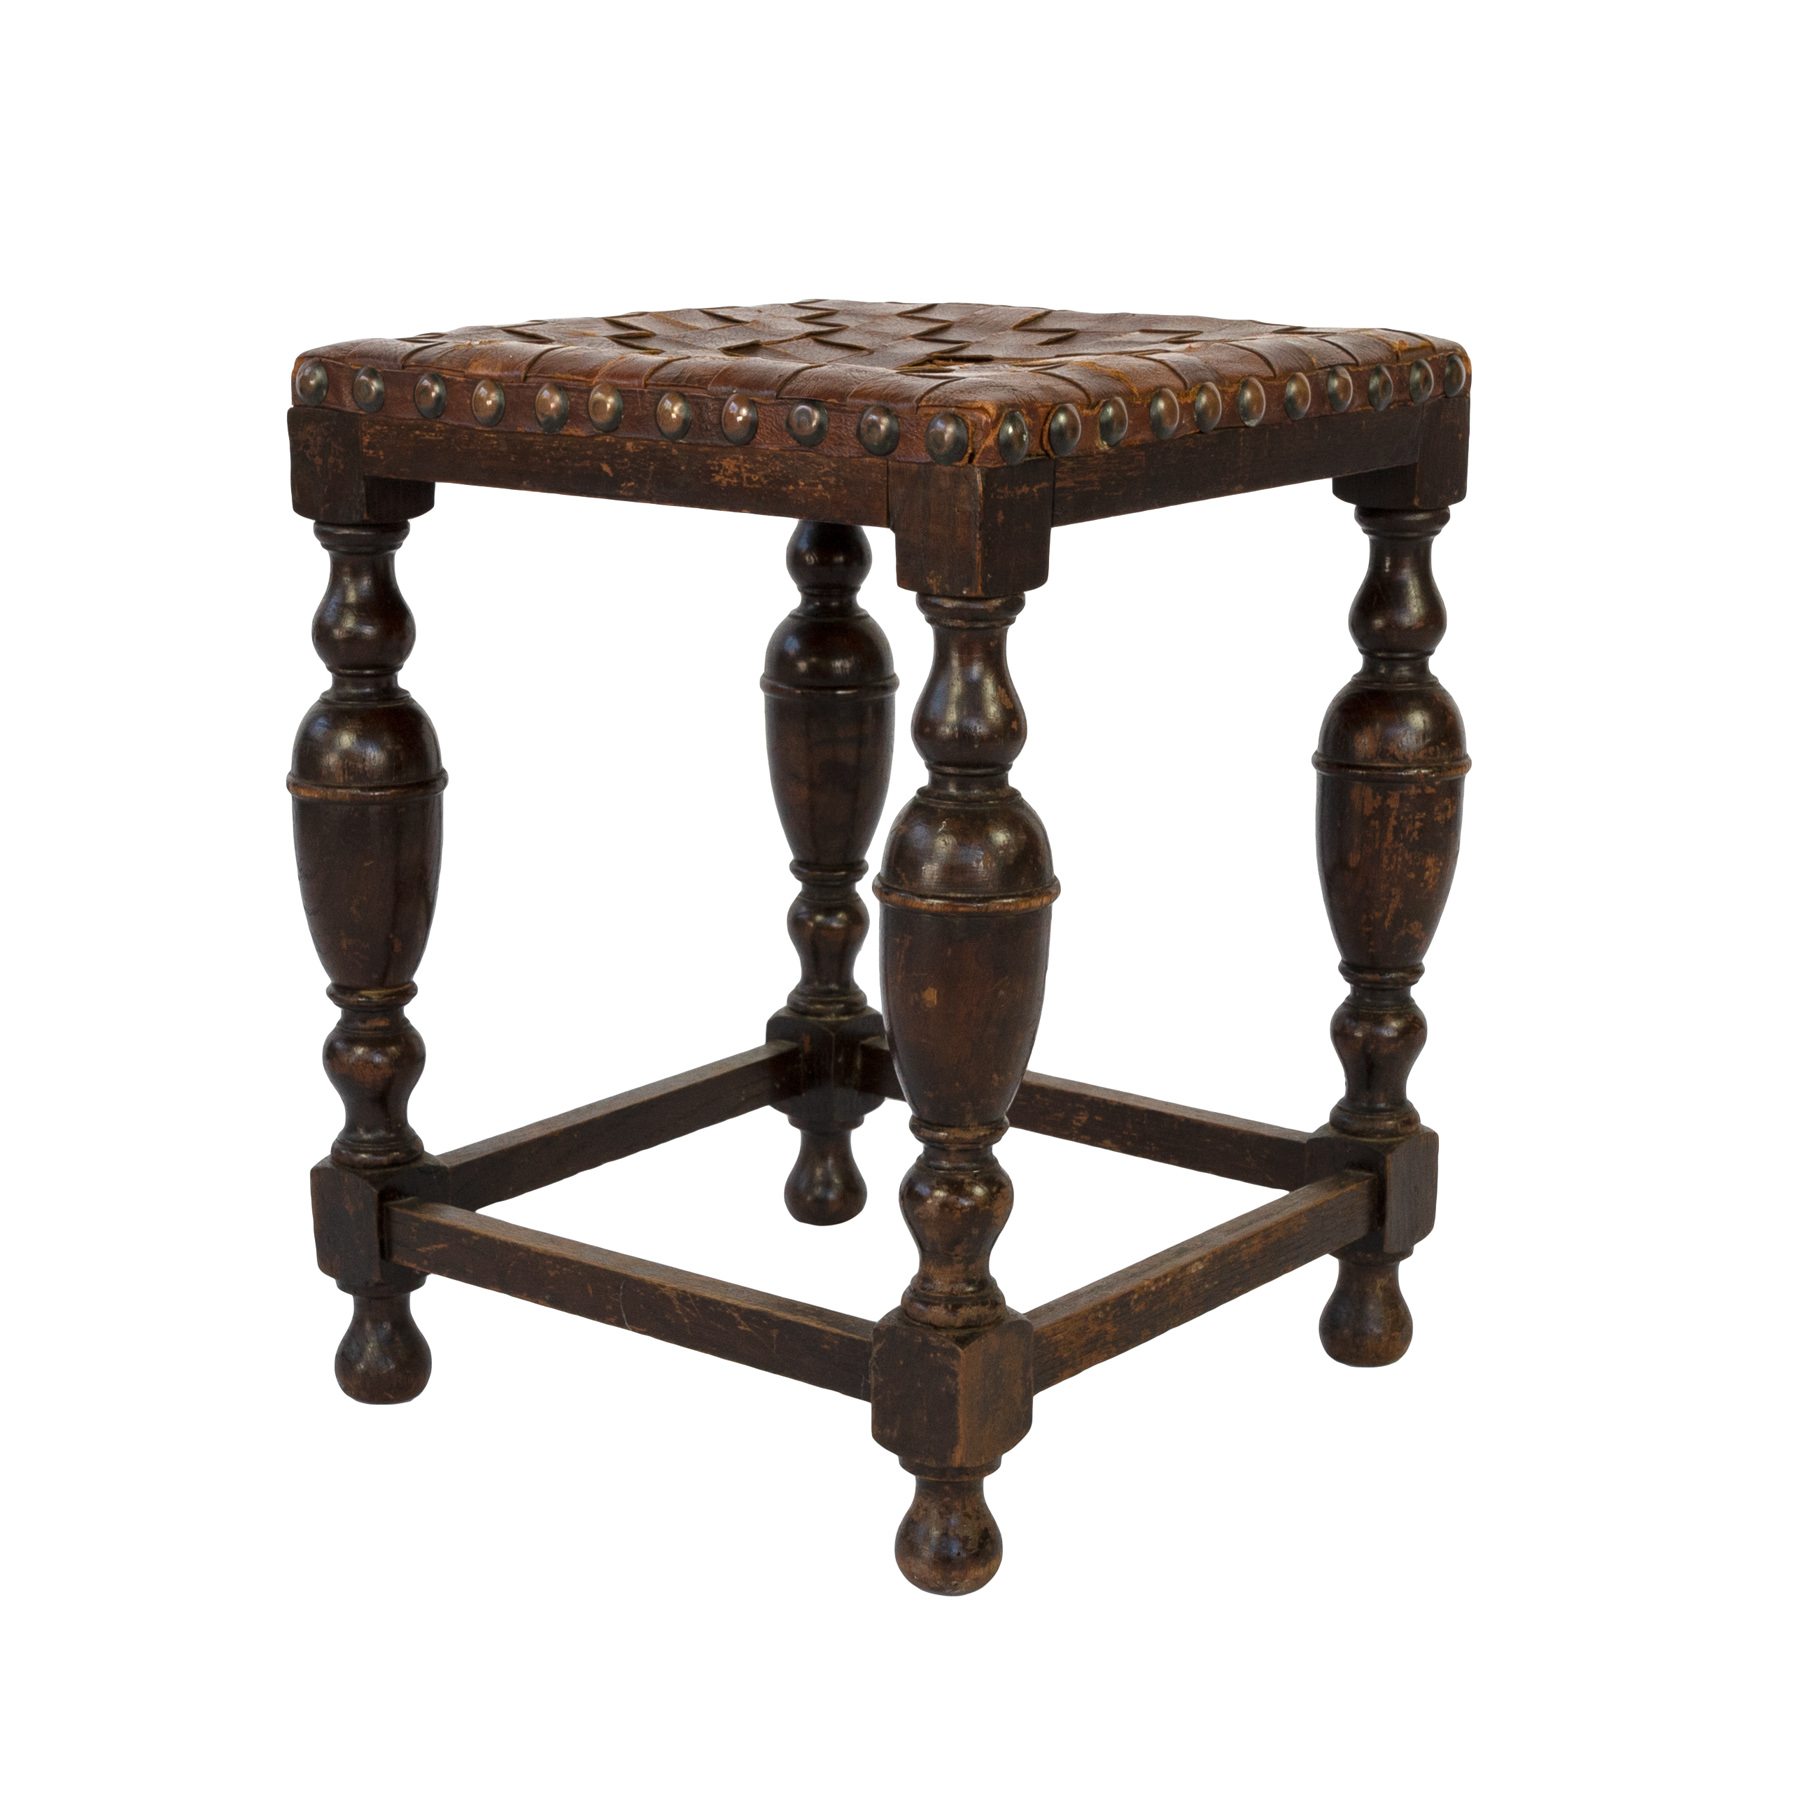 Vintage Square English Stool With Woven Strap Leather Seat Circa 1800